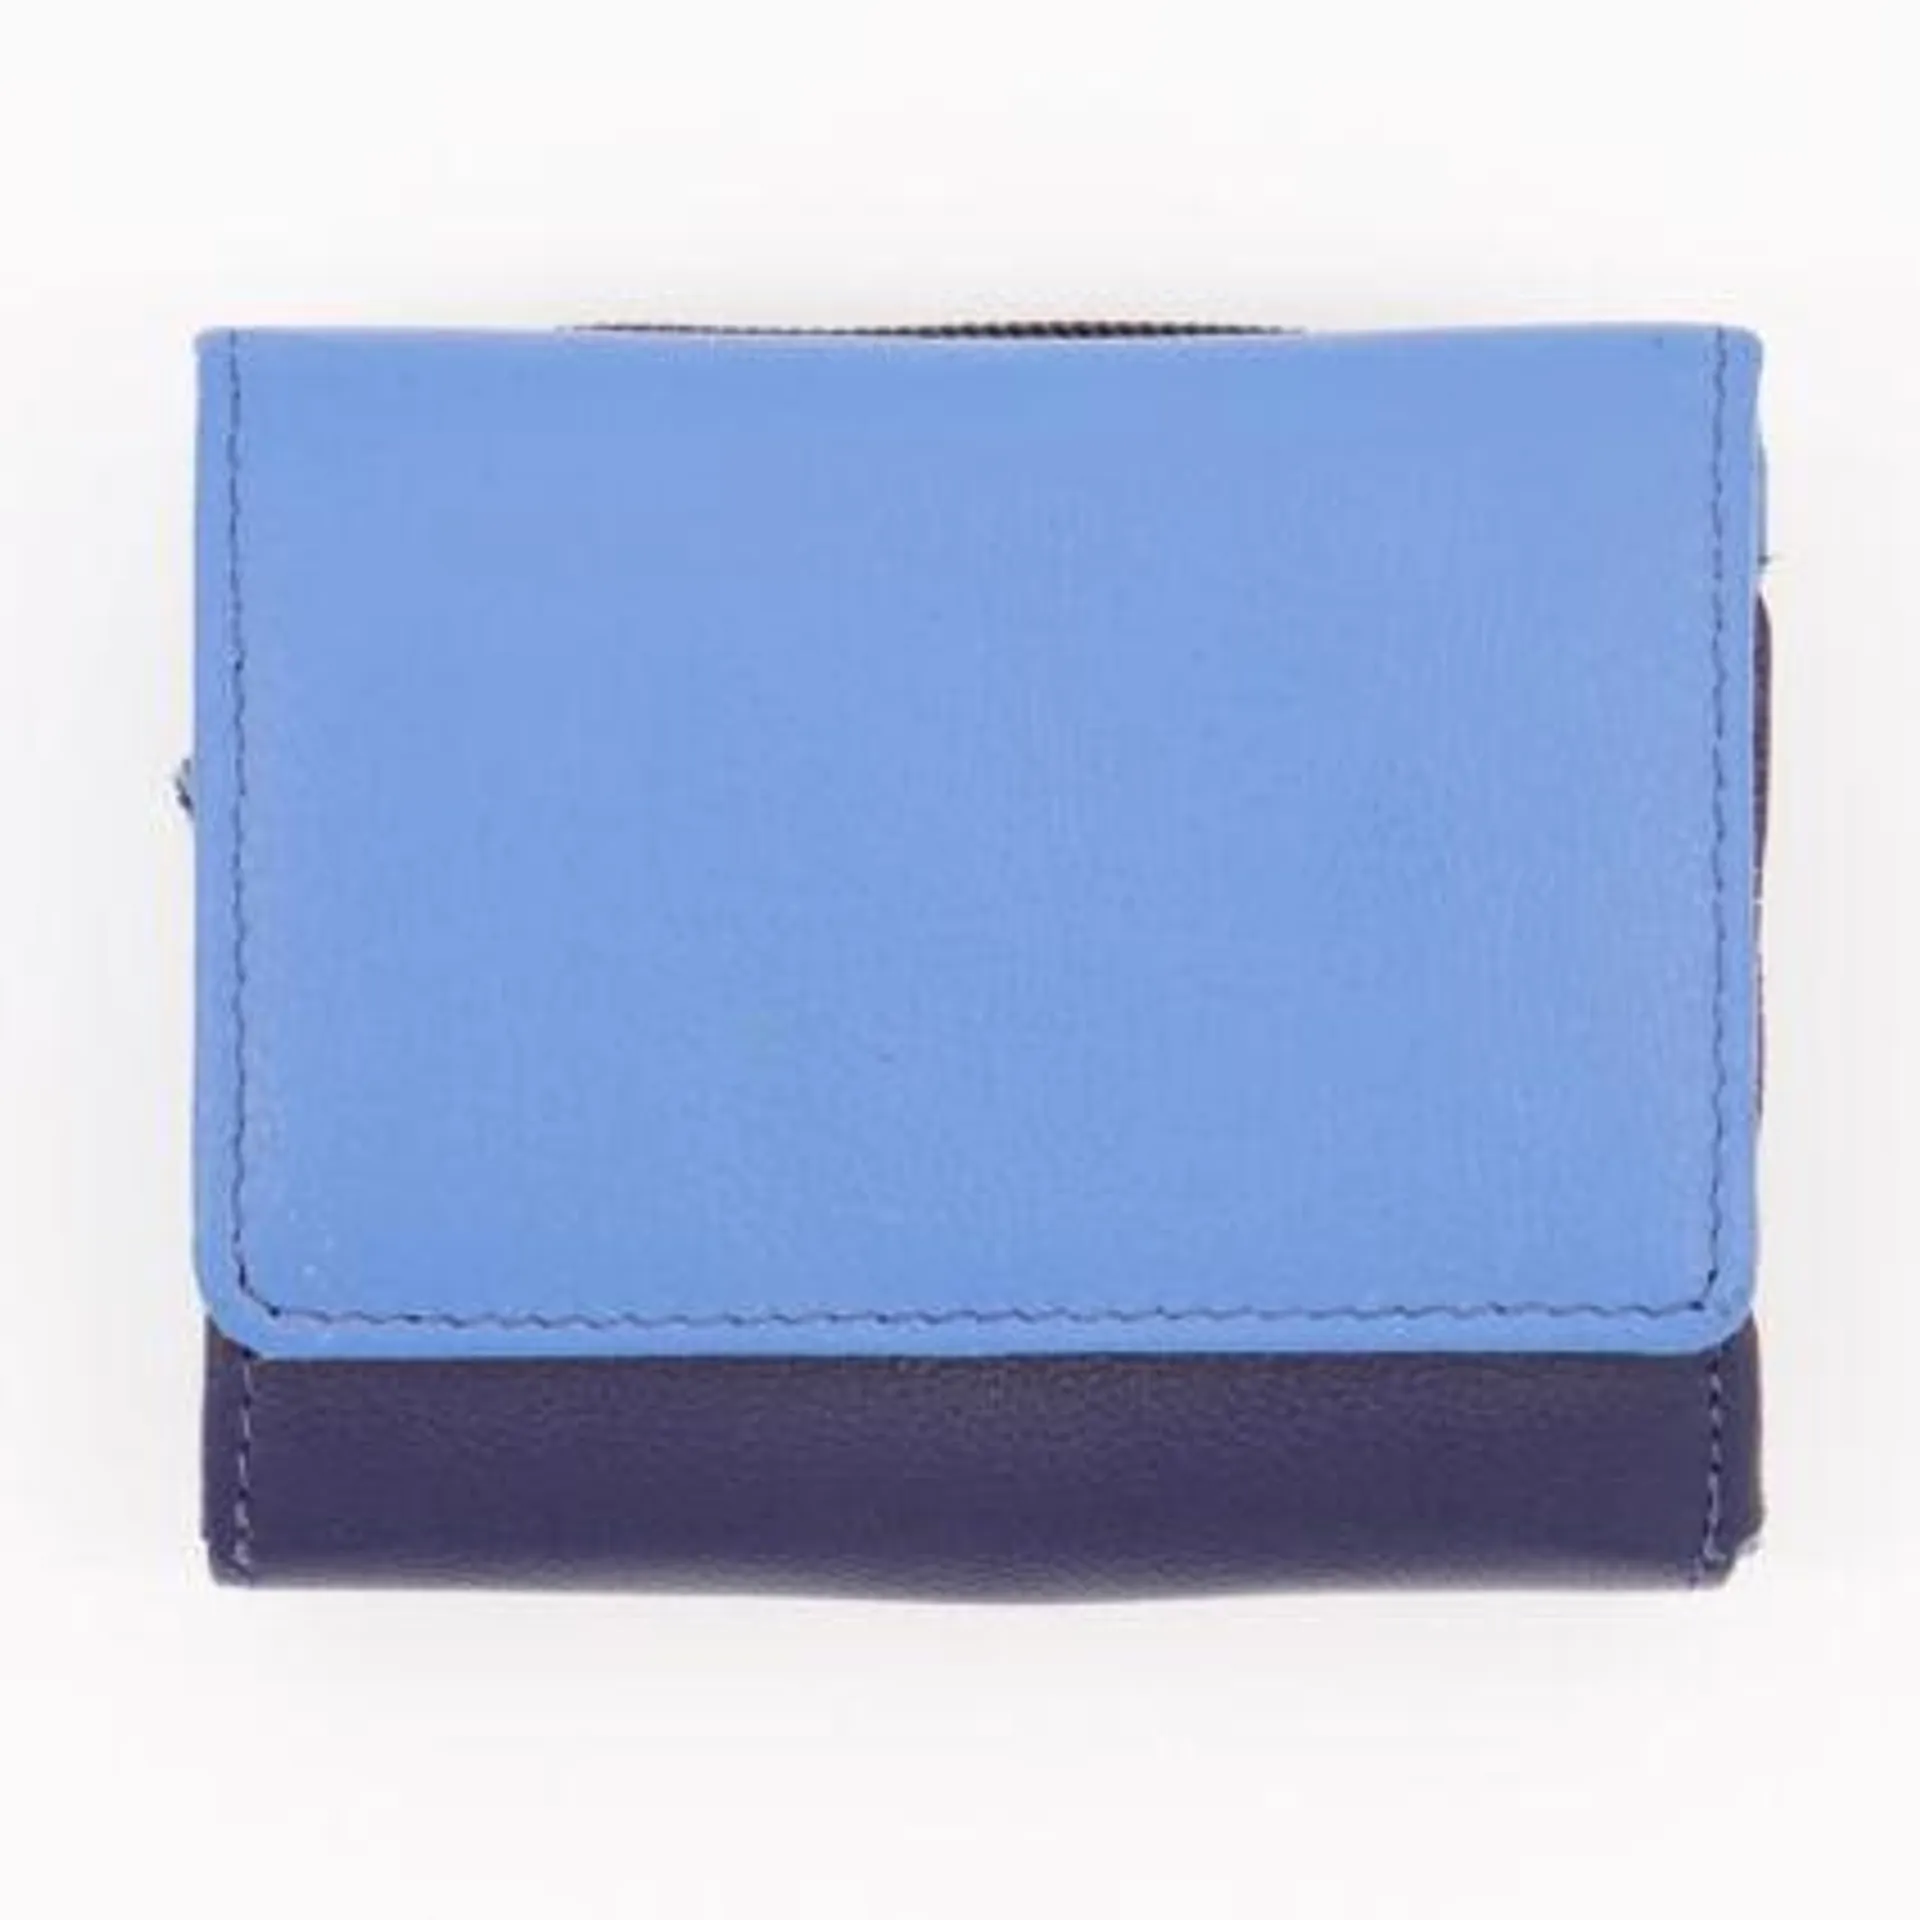 Blue & Navy RFID Protected Purse